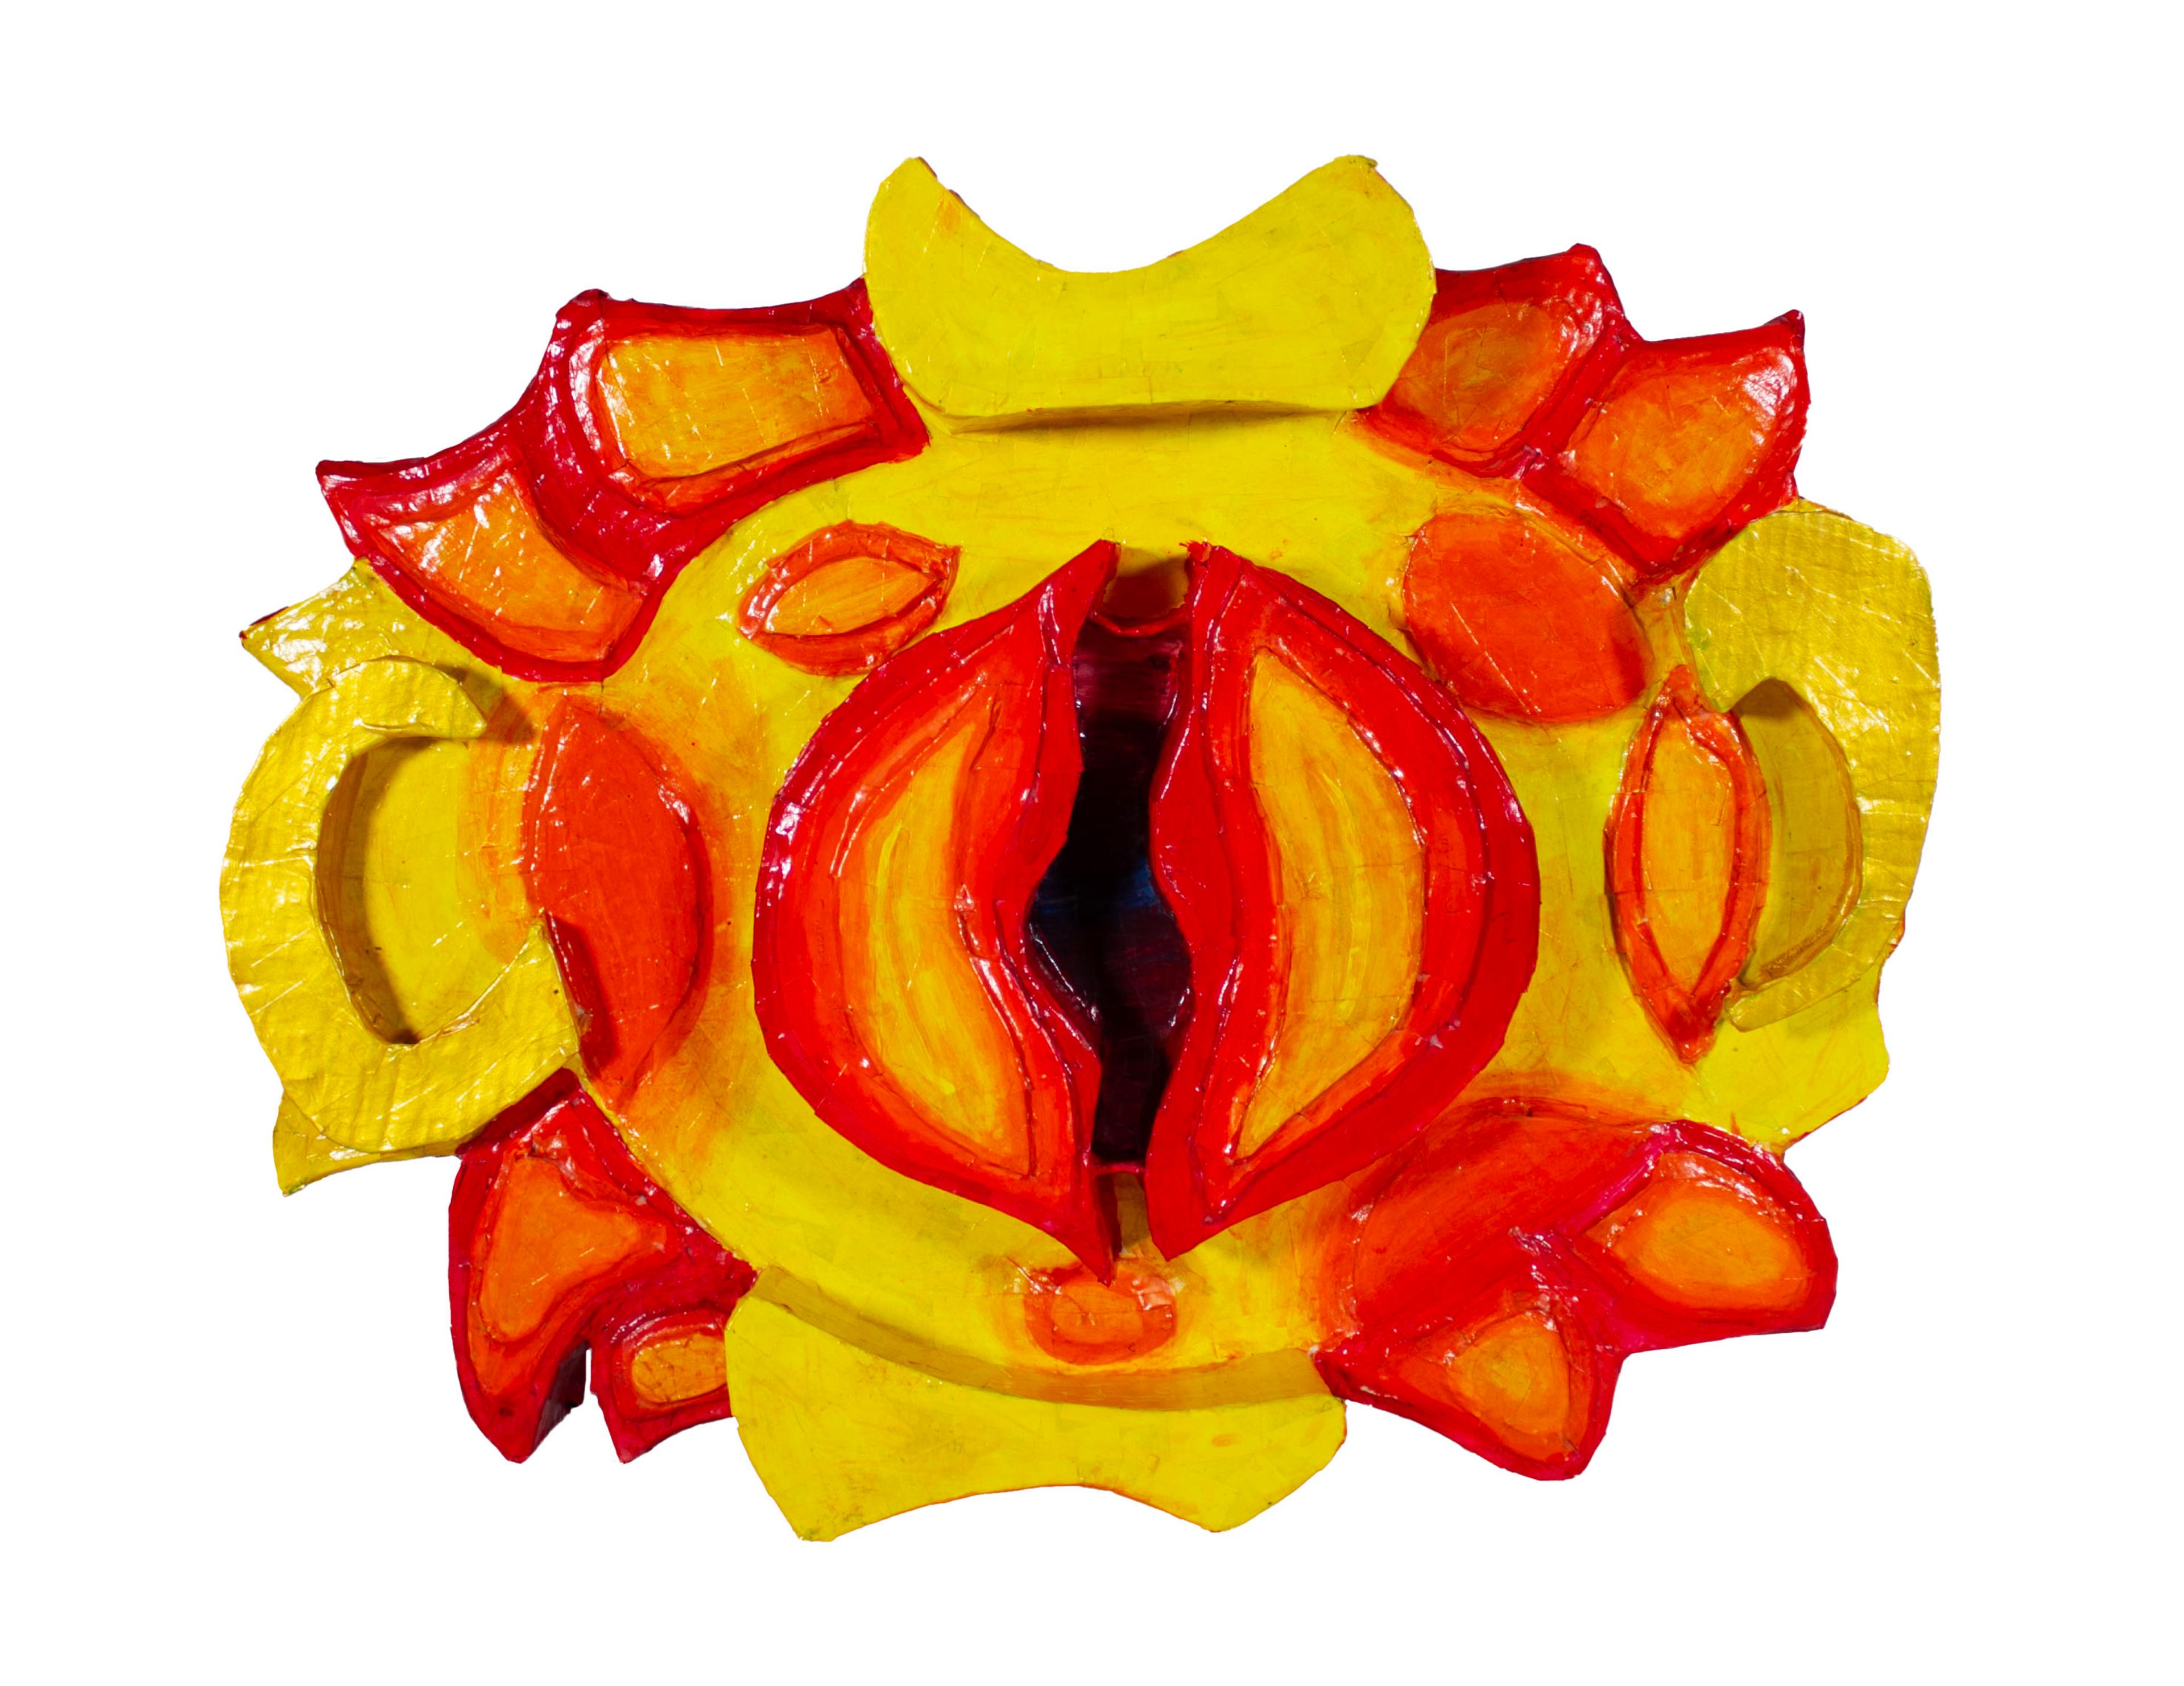 Recycled cardboard sculpture of a bright yellow flower fringed with bright red accents on the outer edges of the petals and a red orange bloom at the center.